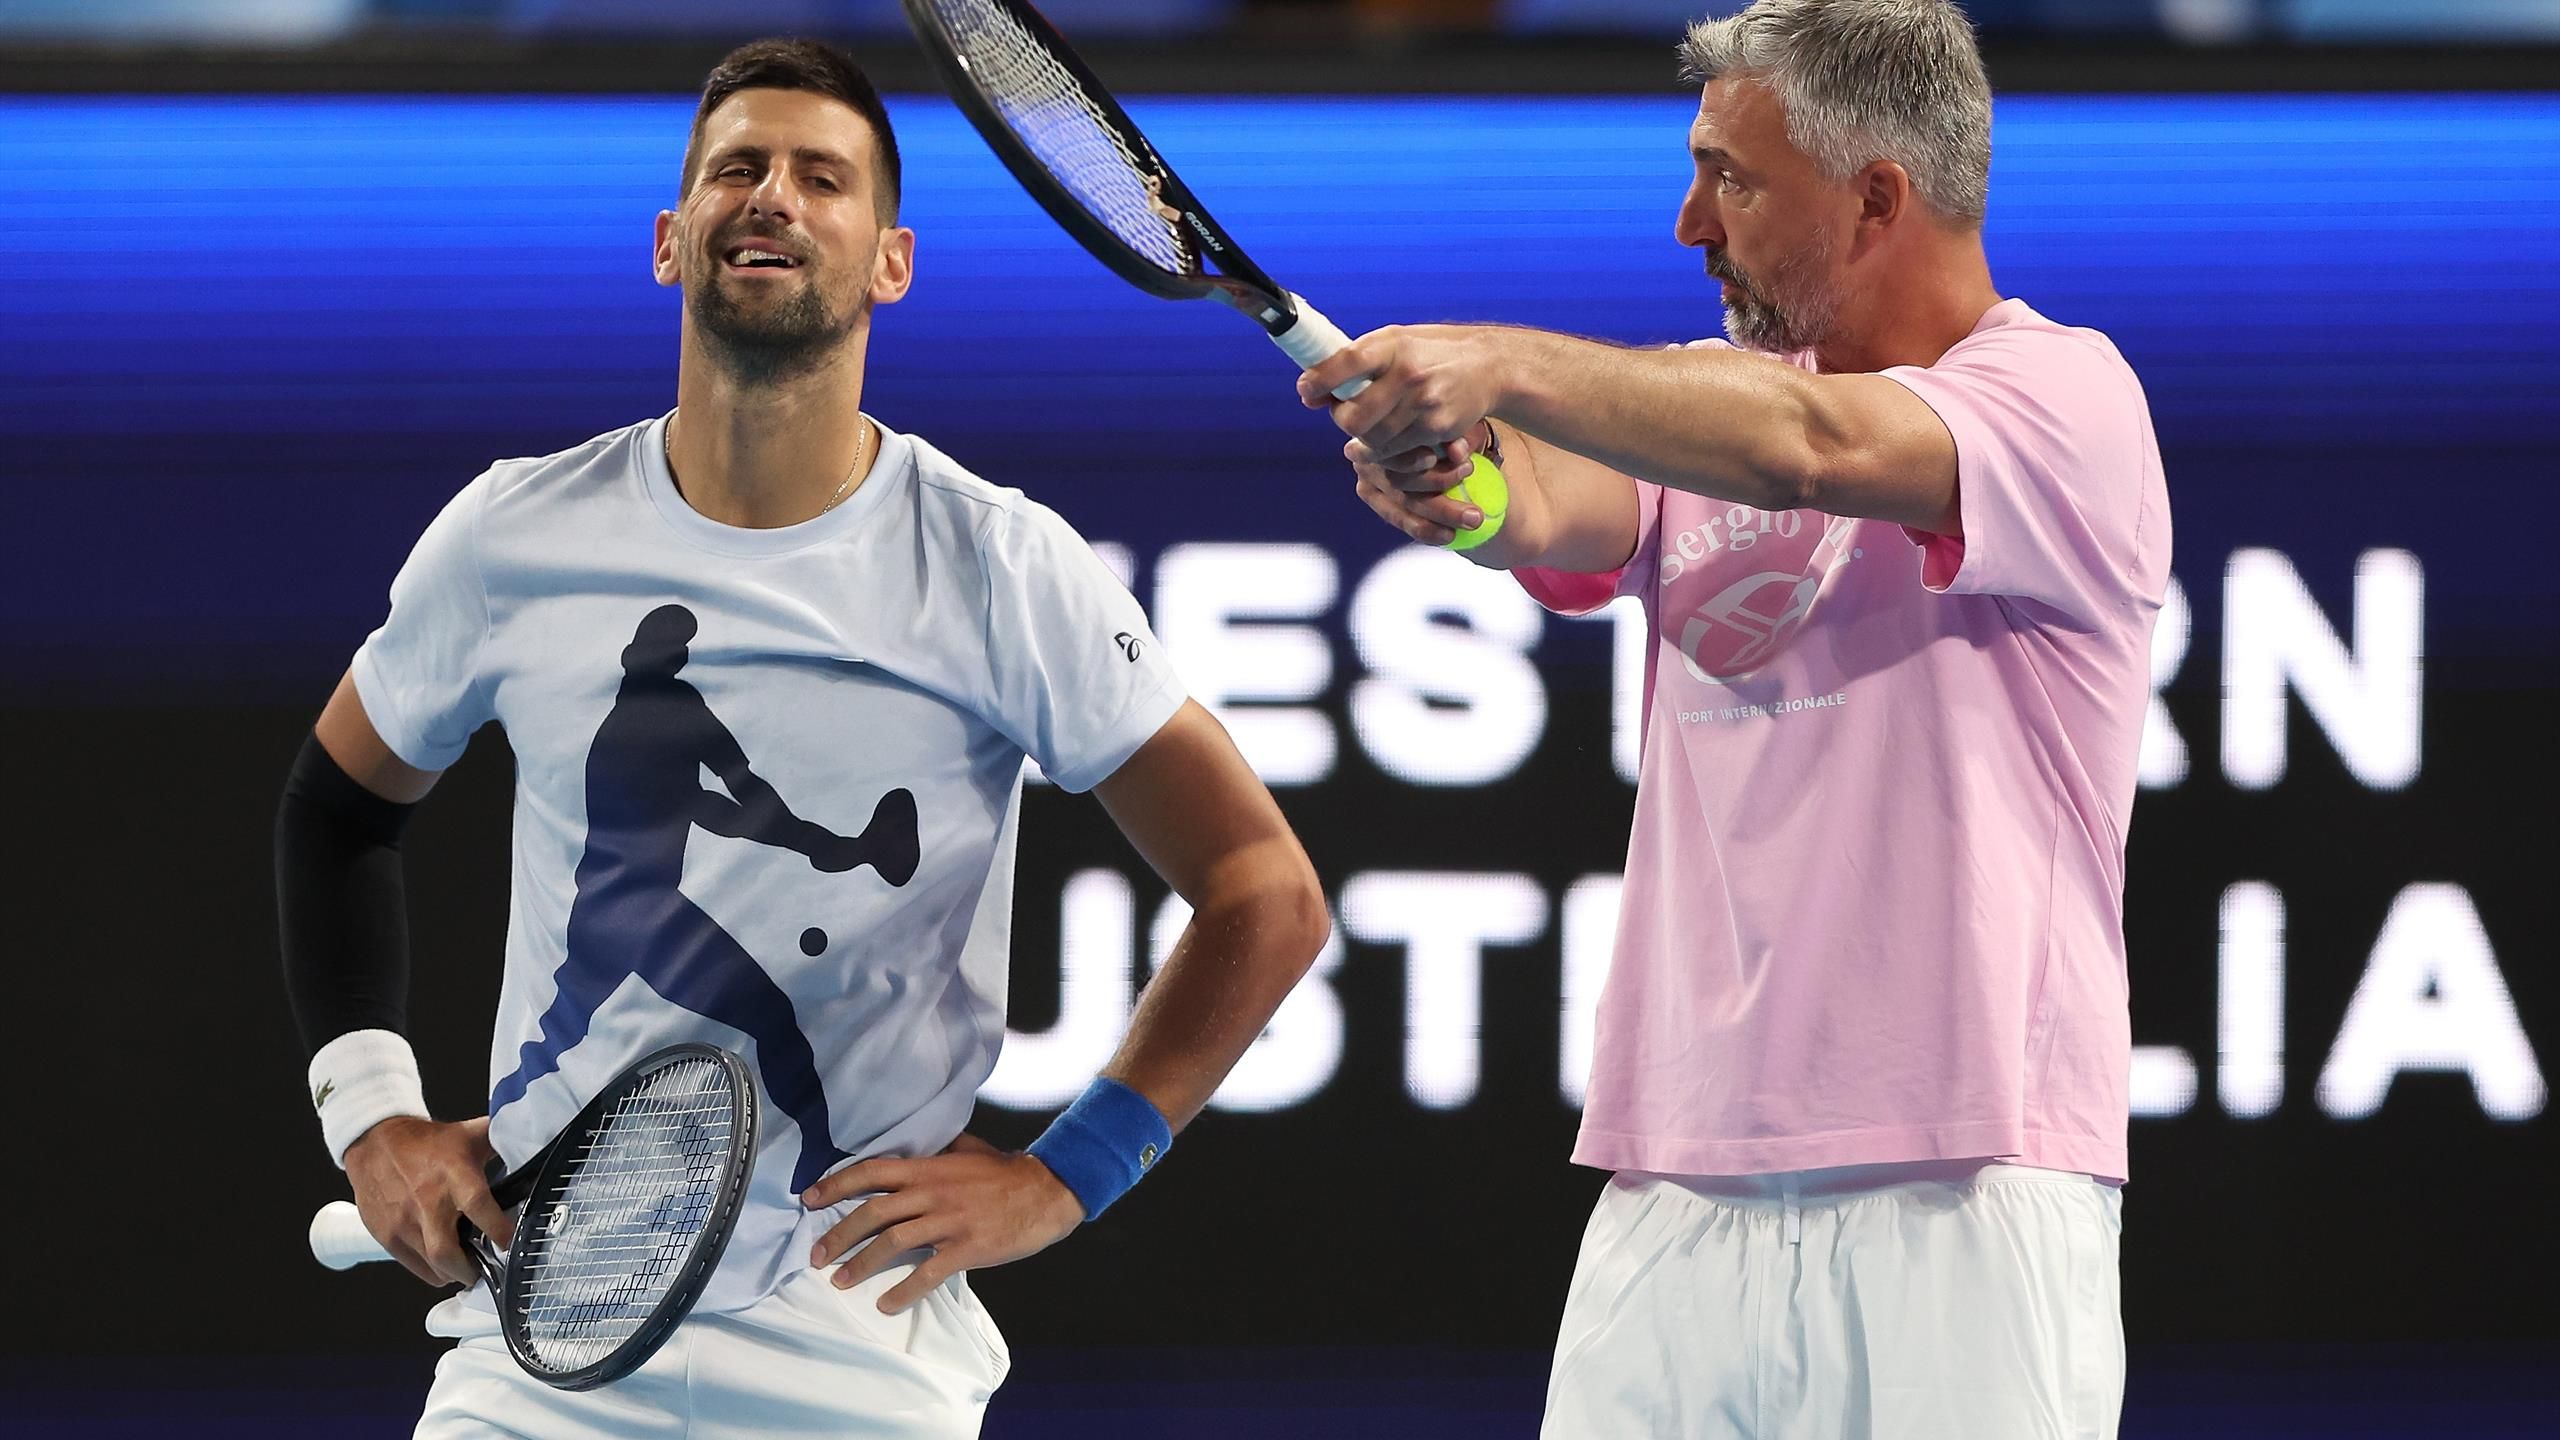 Novak Djokovic and coach Goran Ivanisevic go their separate ways, with world No. 1 expressing gratitude: ‘Thank you for everything, my friend’